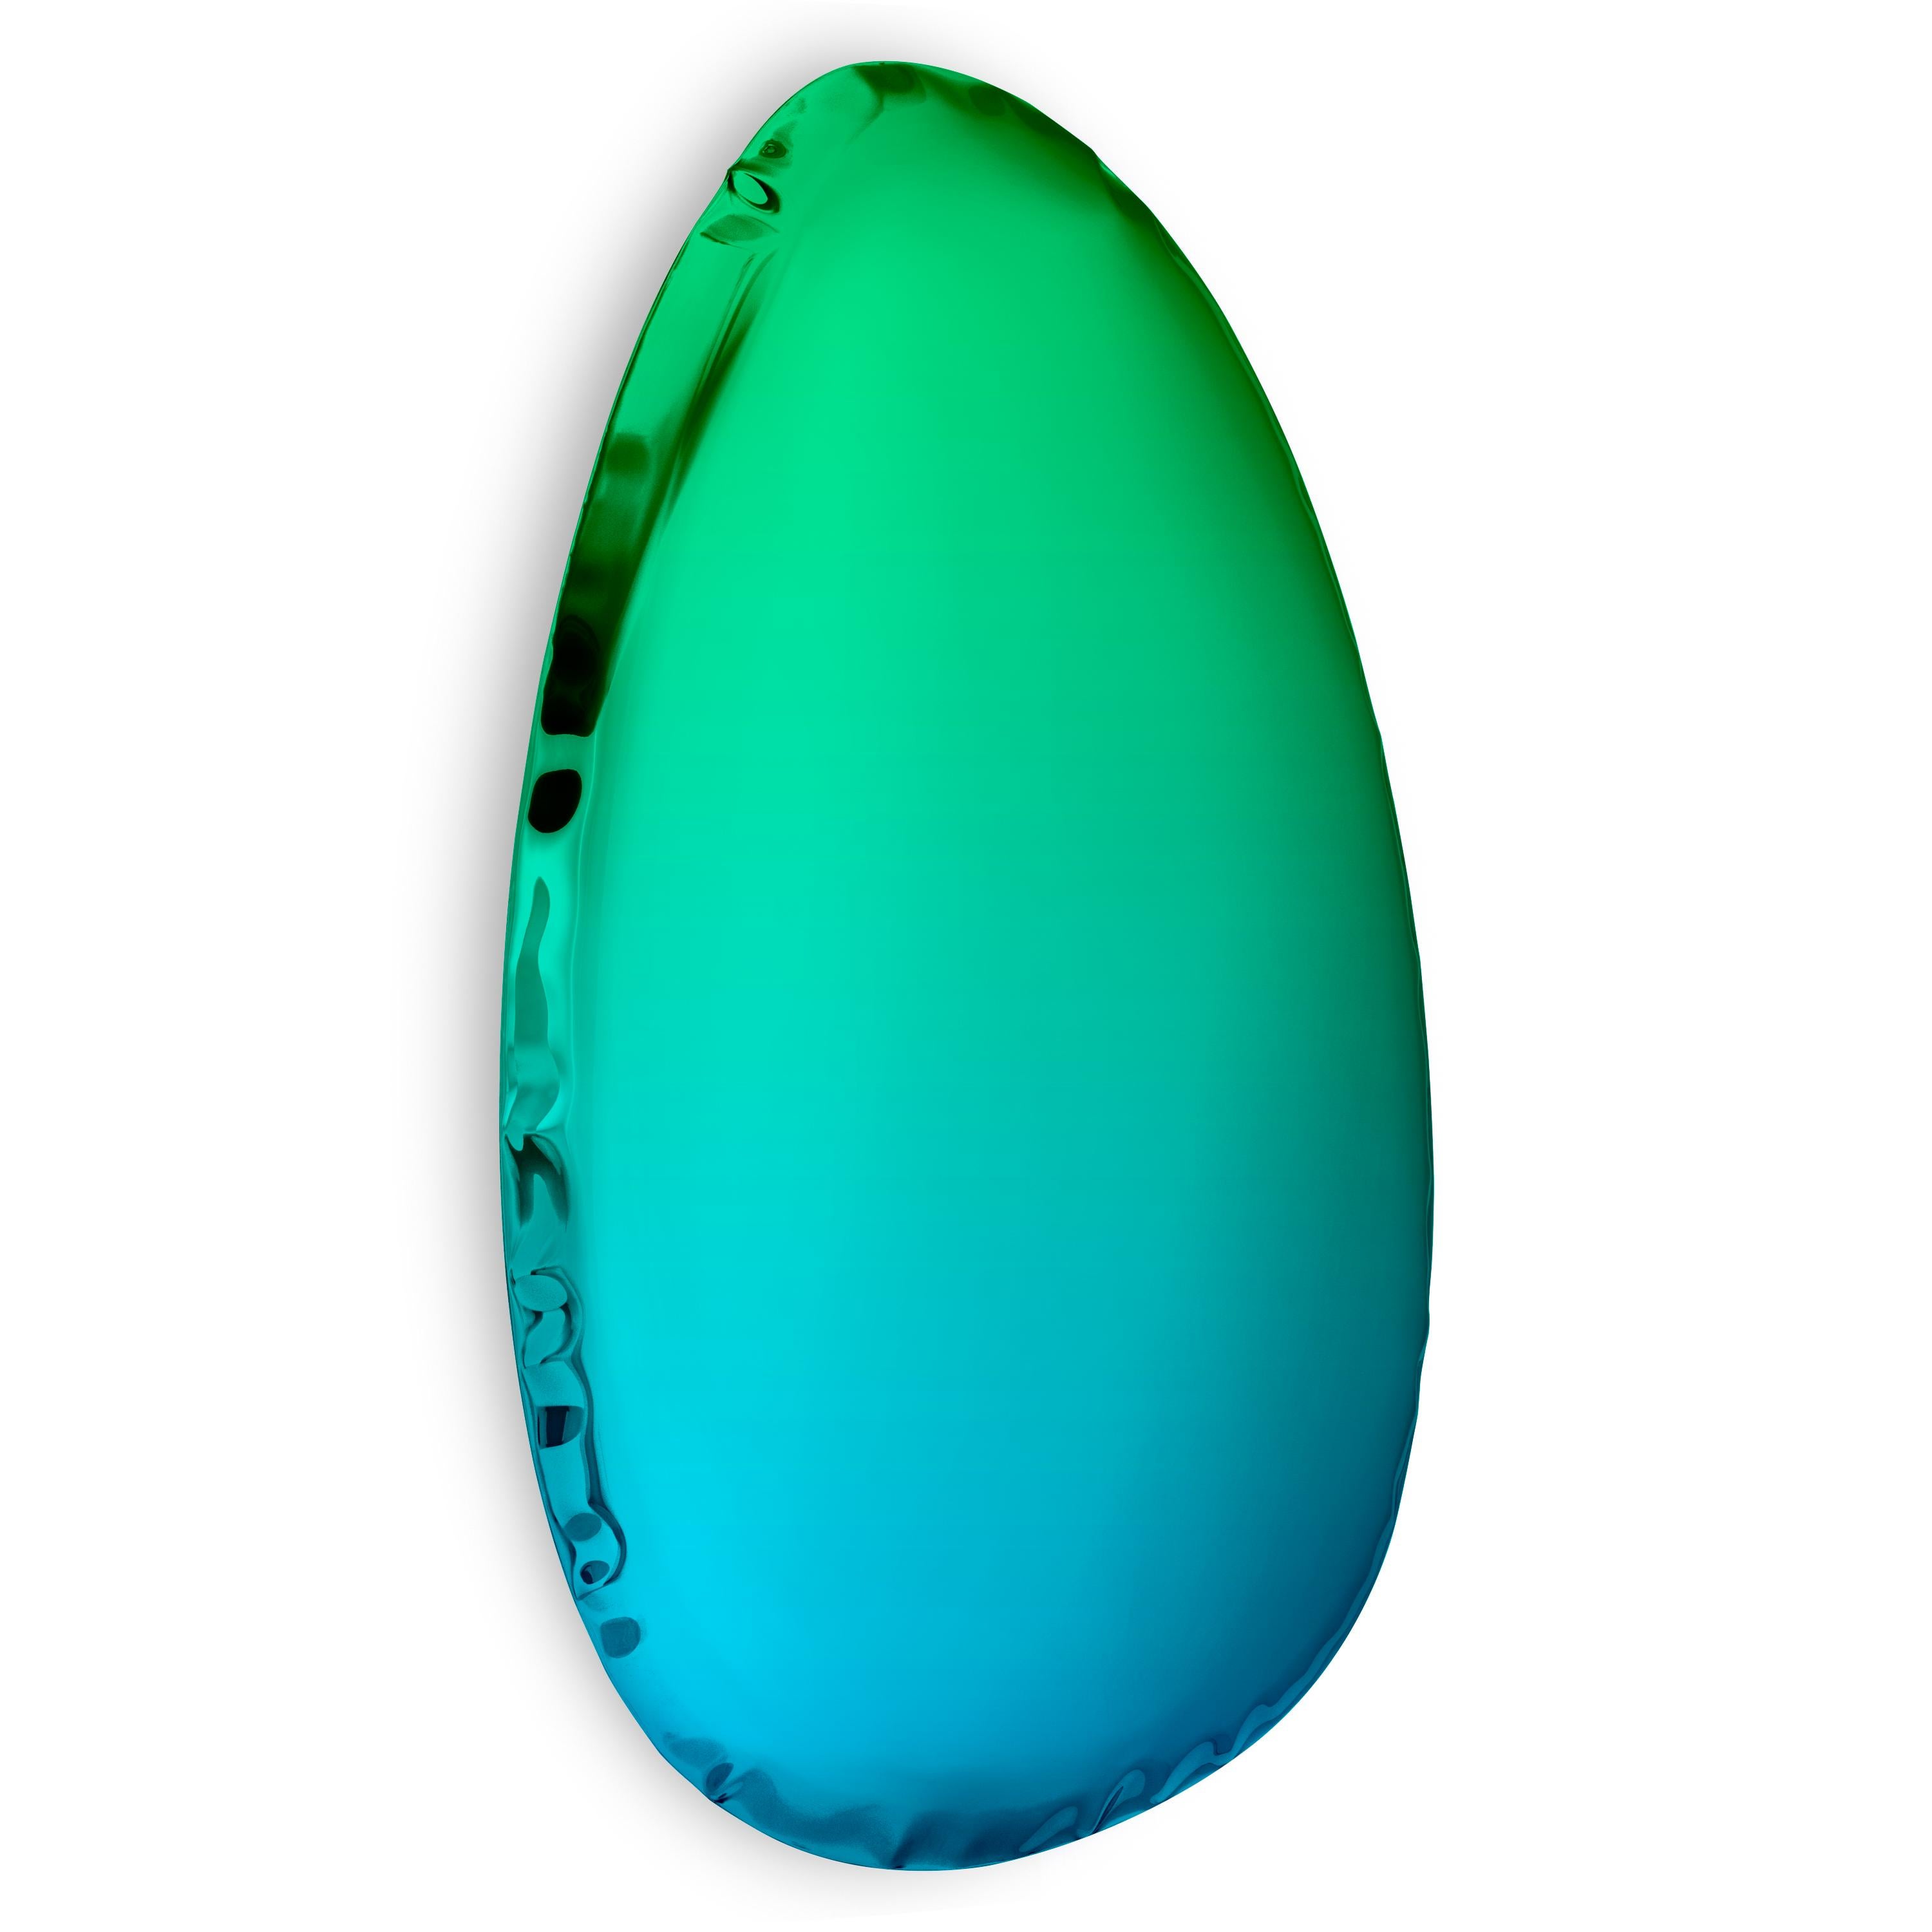 Mirror Tafla O4.5 Emerald Green, in Polished Stainless Steel by Zieta For Sale 2